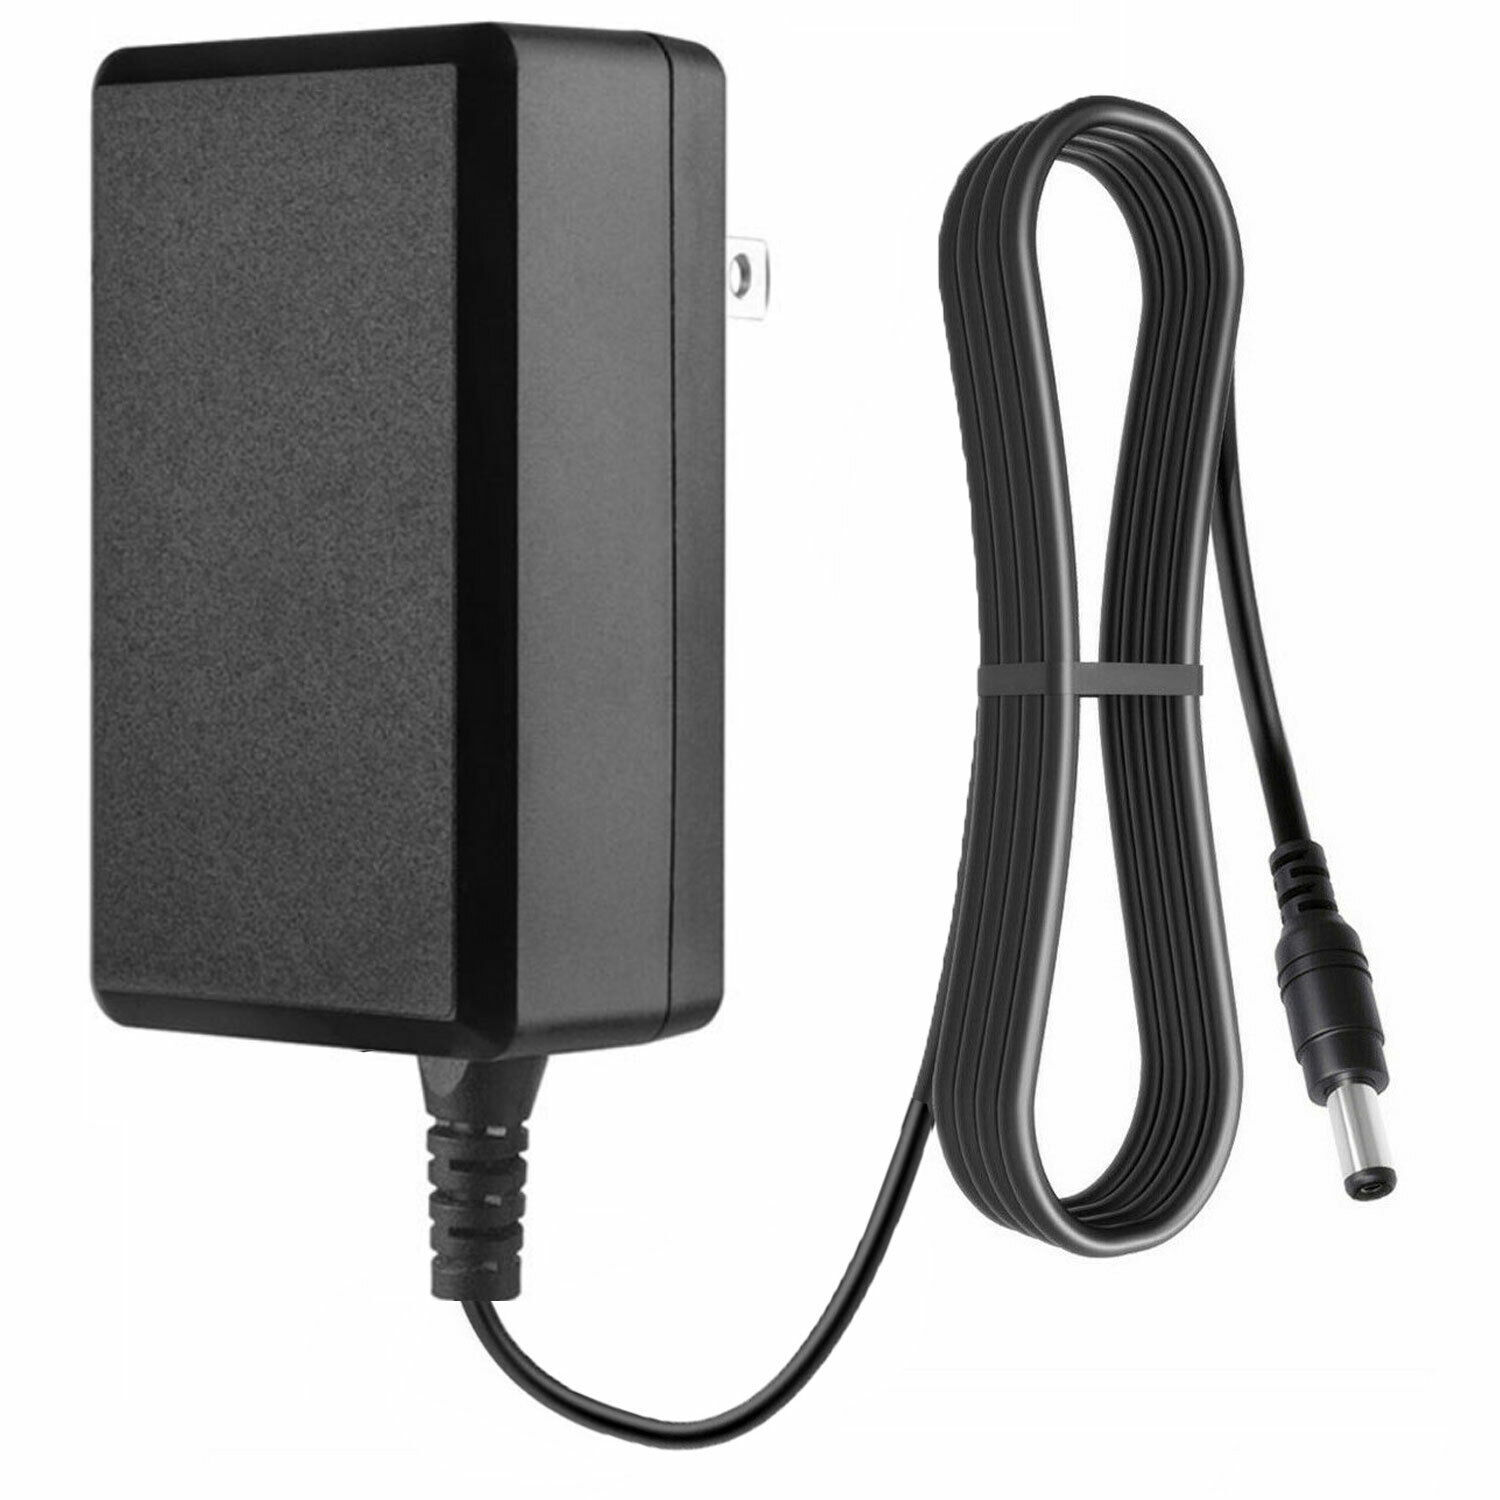 NEW 9V AC/AC Adapter For ART Tube MP Studio Mic Preamp ITE Power Supply Charger AC input voltage ……120VAC 2 Input freq - Click Image to Close